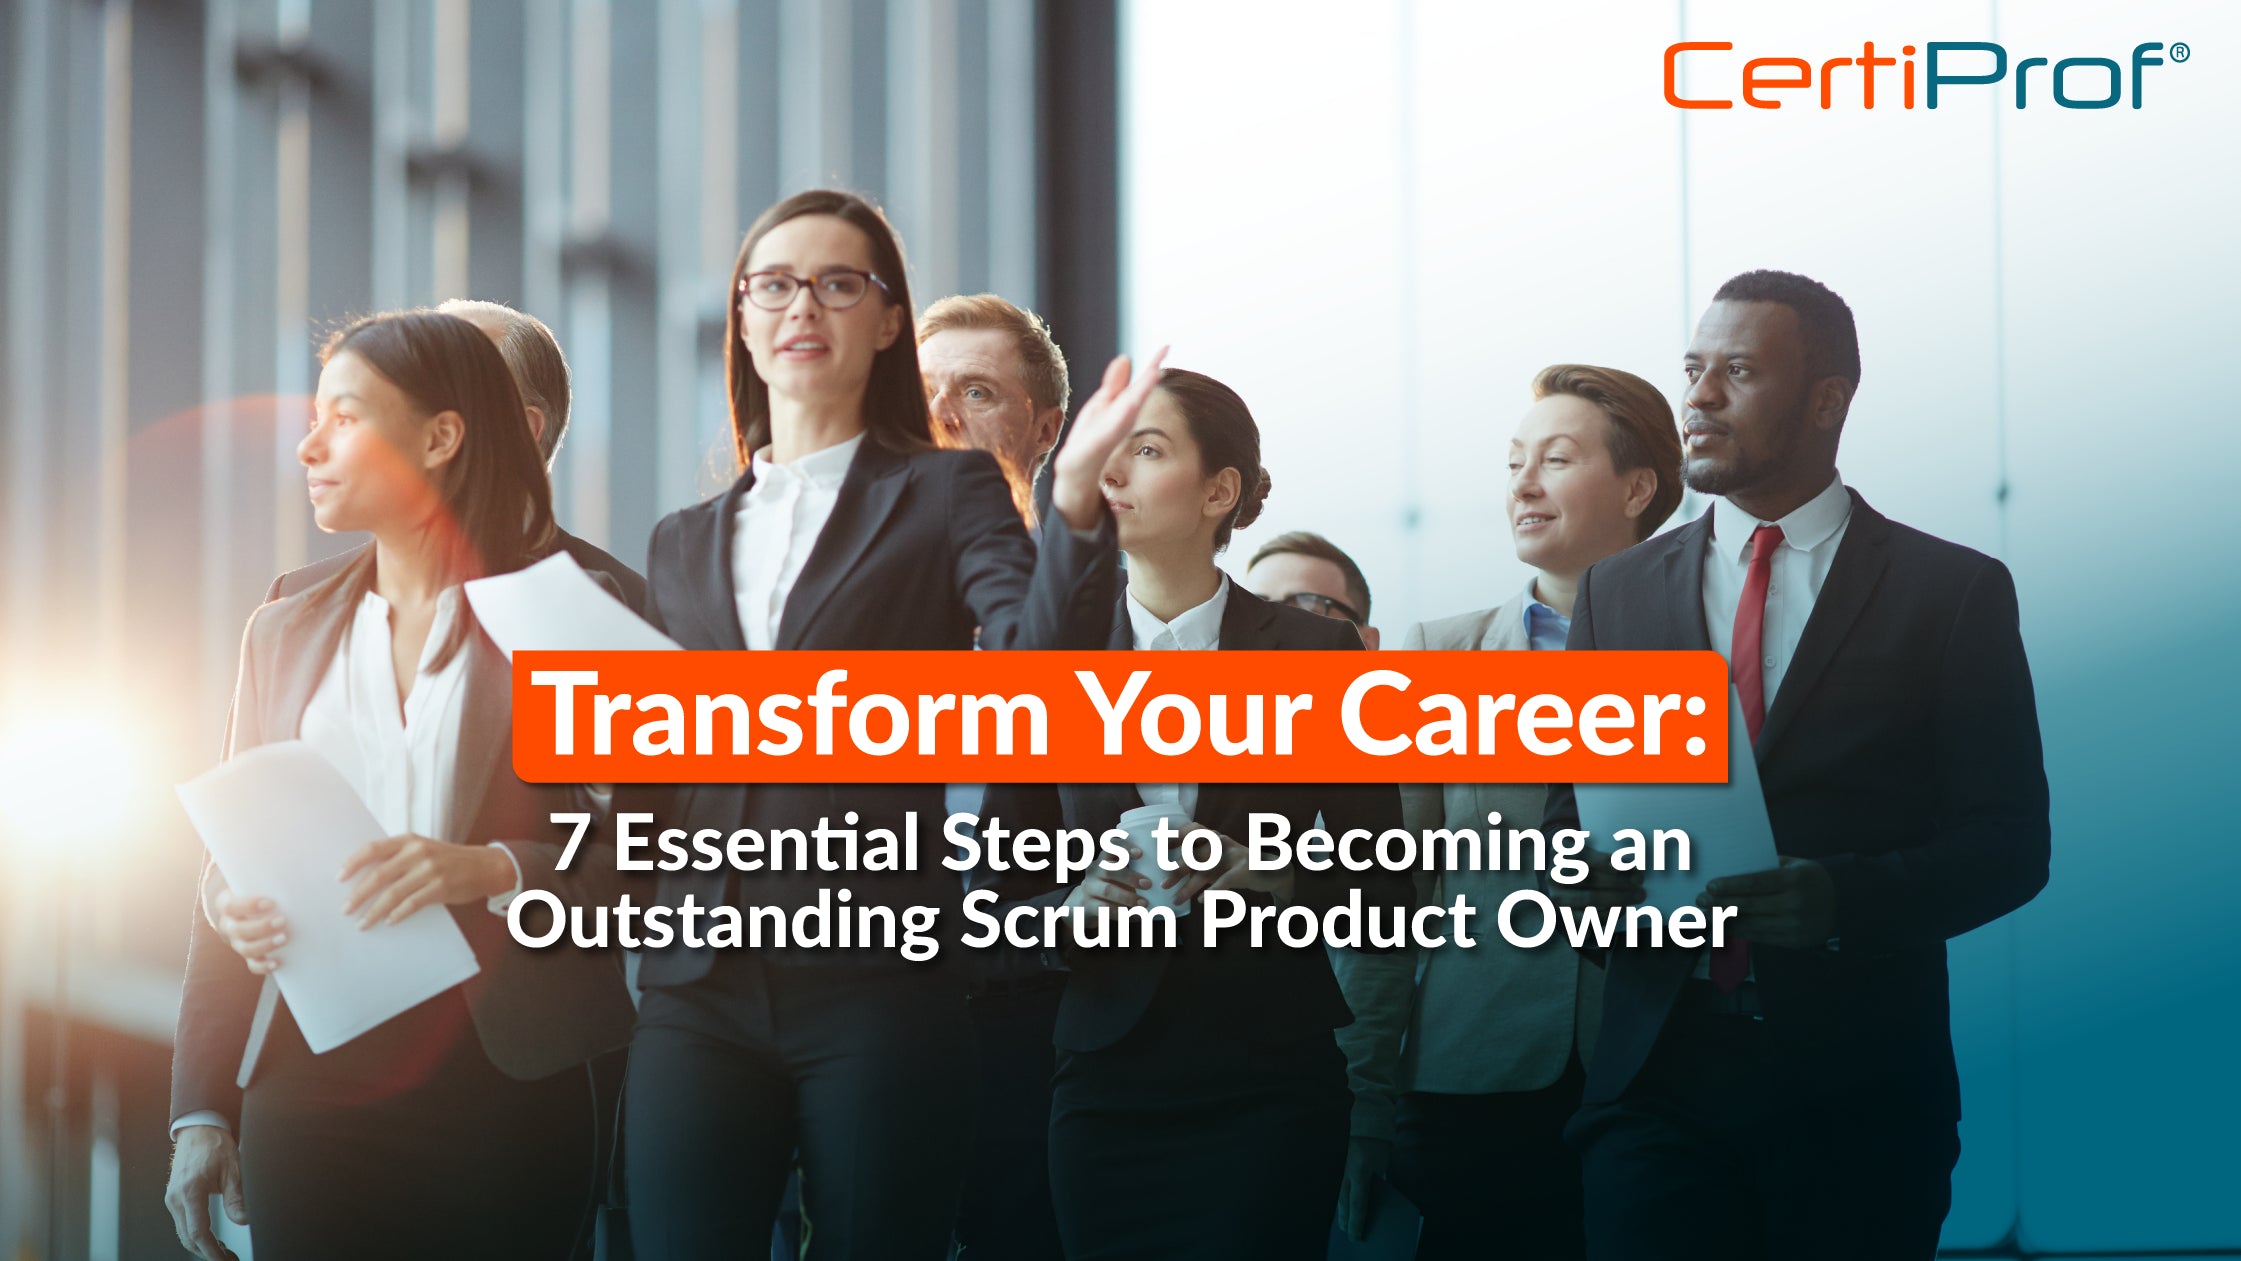 Transform Your Career: 7 Essential Steps to Become an Outstanding Scrum Product Owner